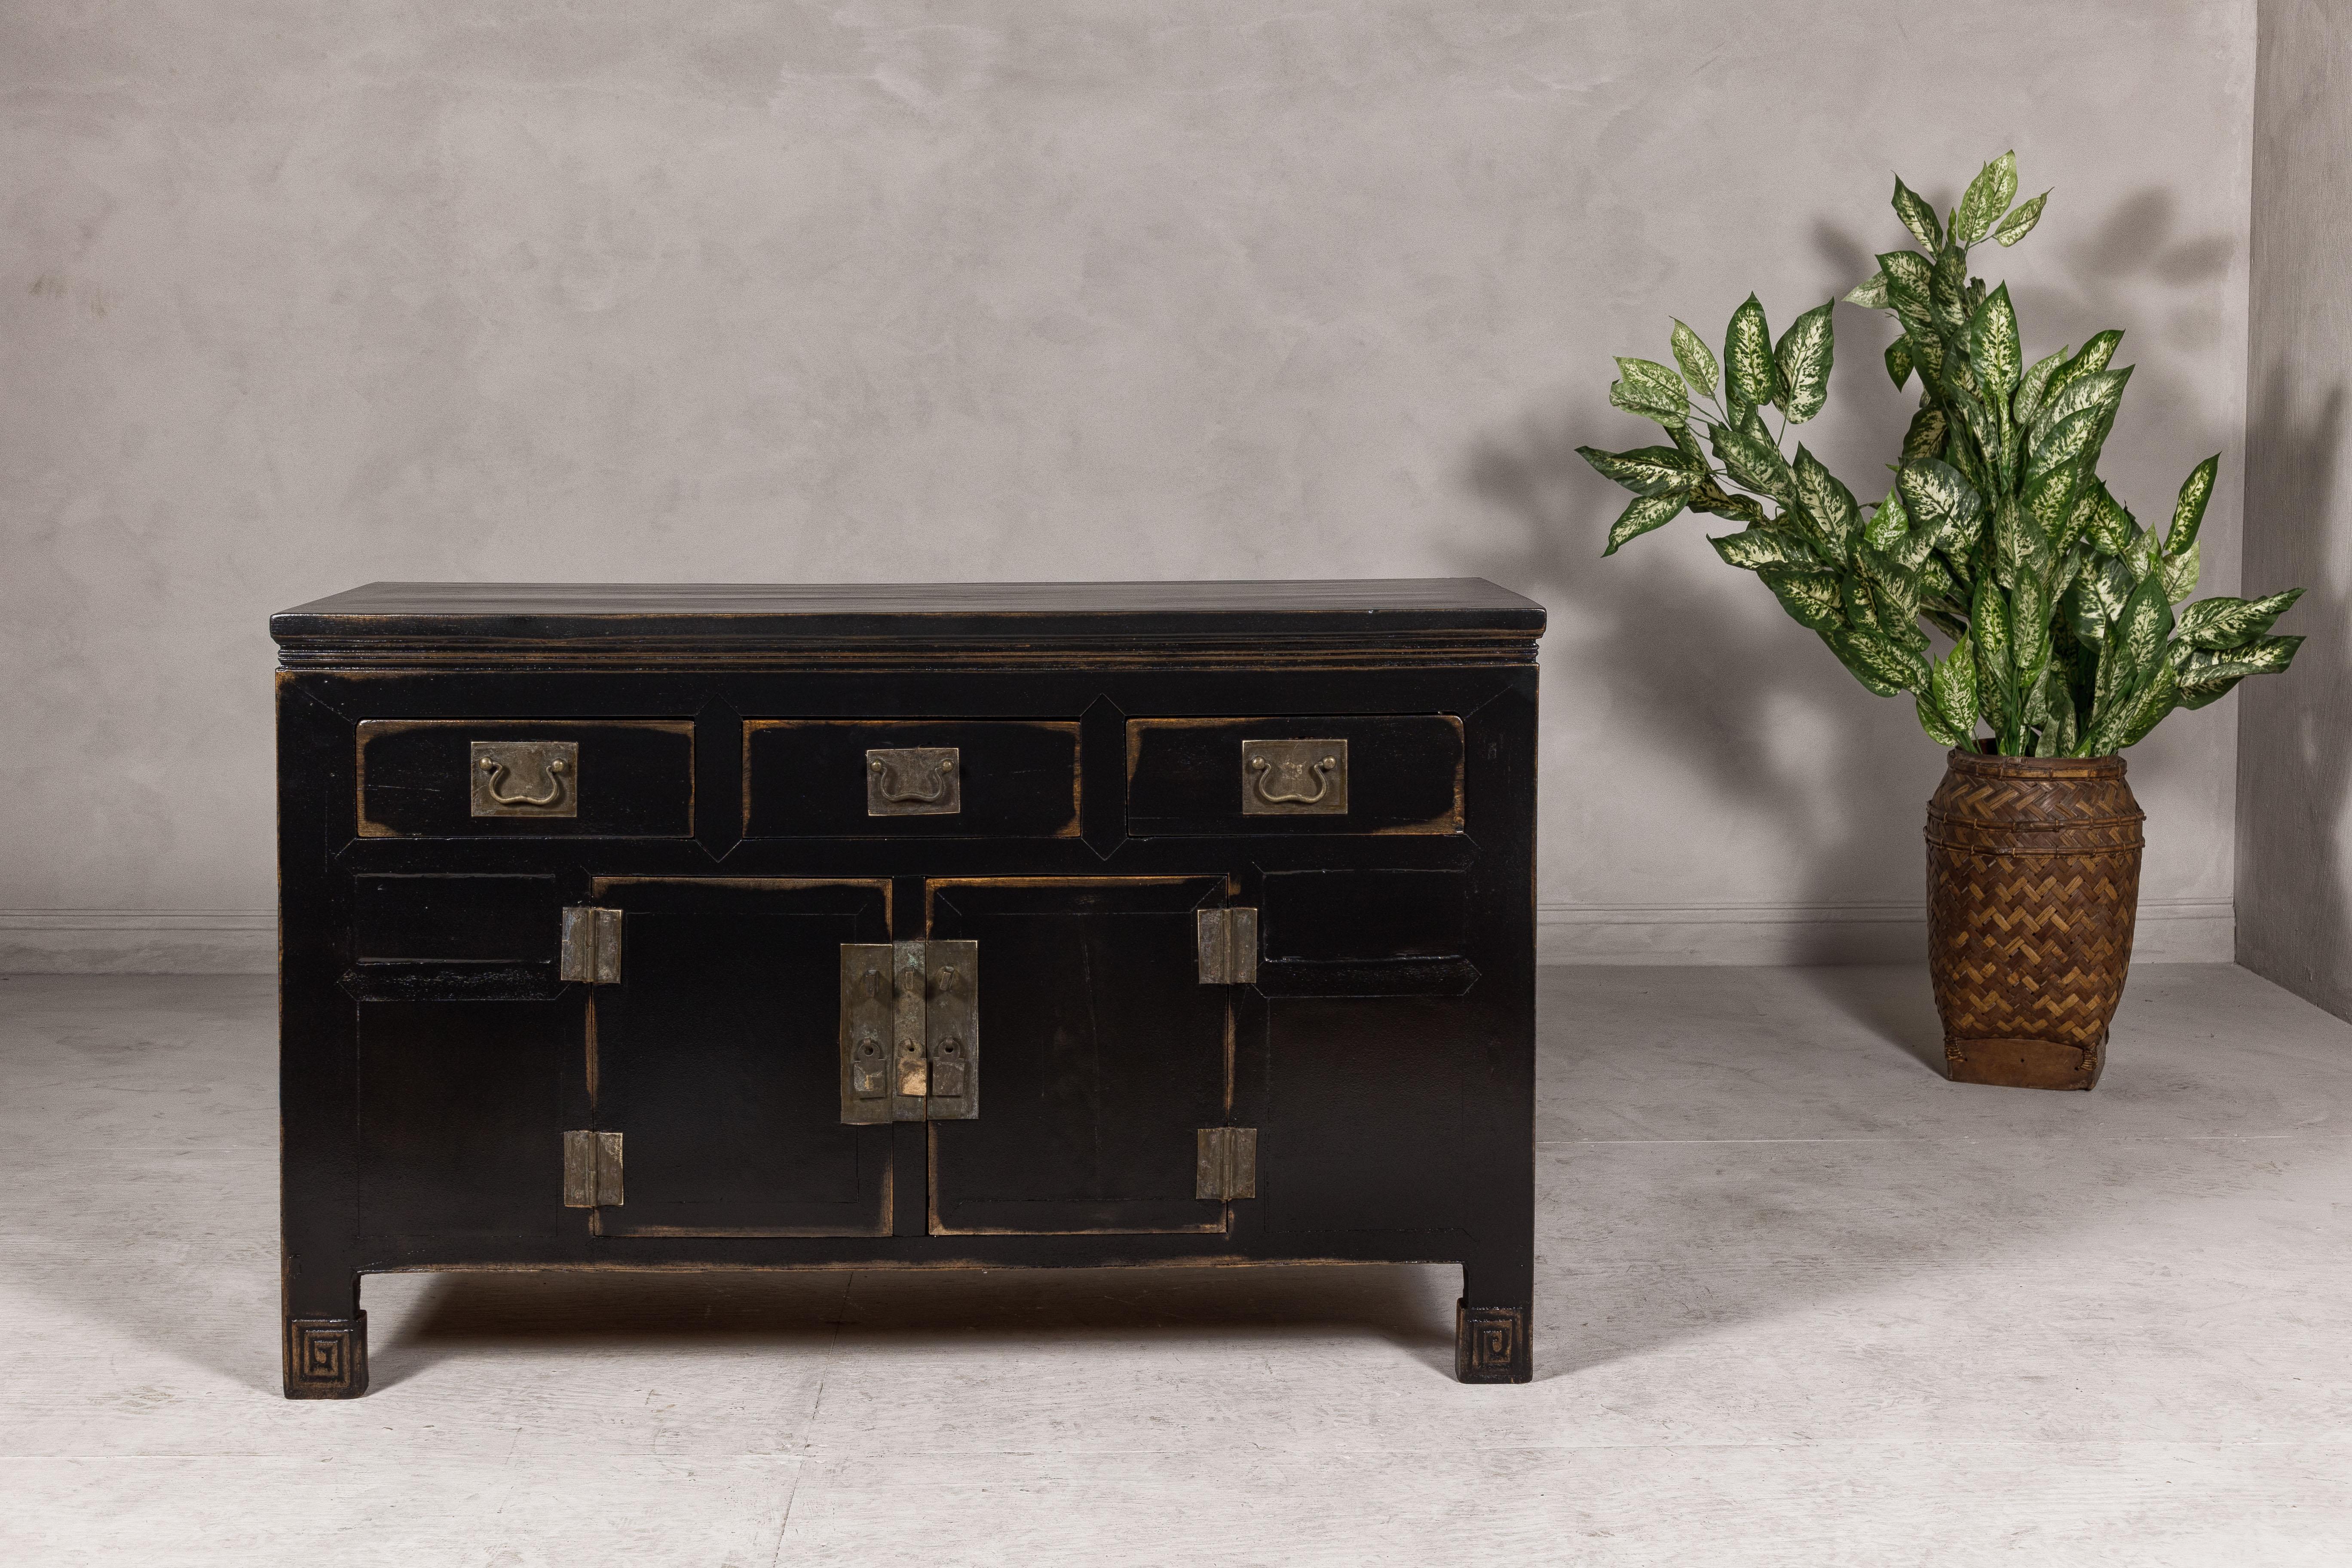 A black lacquered Qing Dynasty sideboard from the 19th century with rubbed edges, brass hardware, three drawers over two doors. This 19th-century Qing Dynasty sideboard exudes timeless elegance with its deep black lacquered finish, thoughtfully